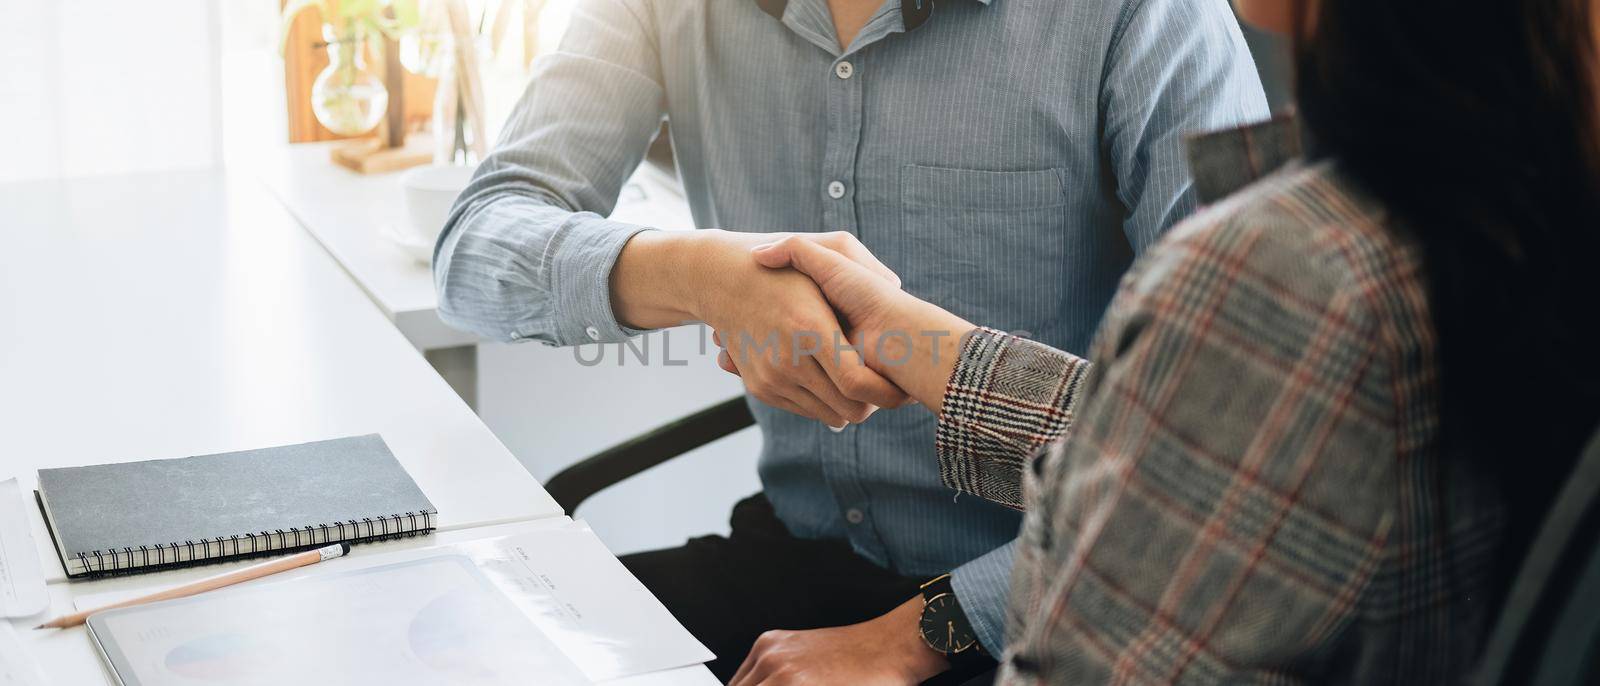 Asian business people shaking hands, finishing up meeting, business etiquette, congratulation, merger and acquisition concept.